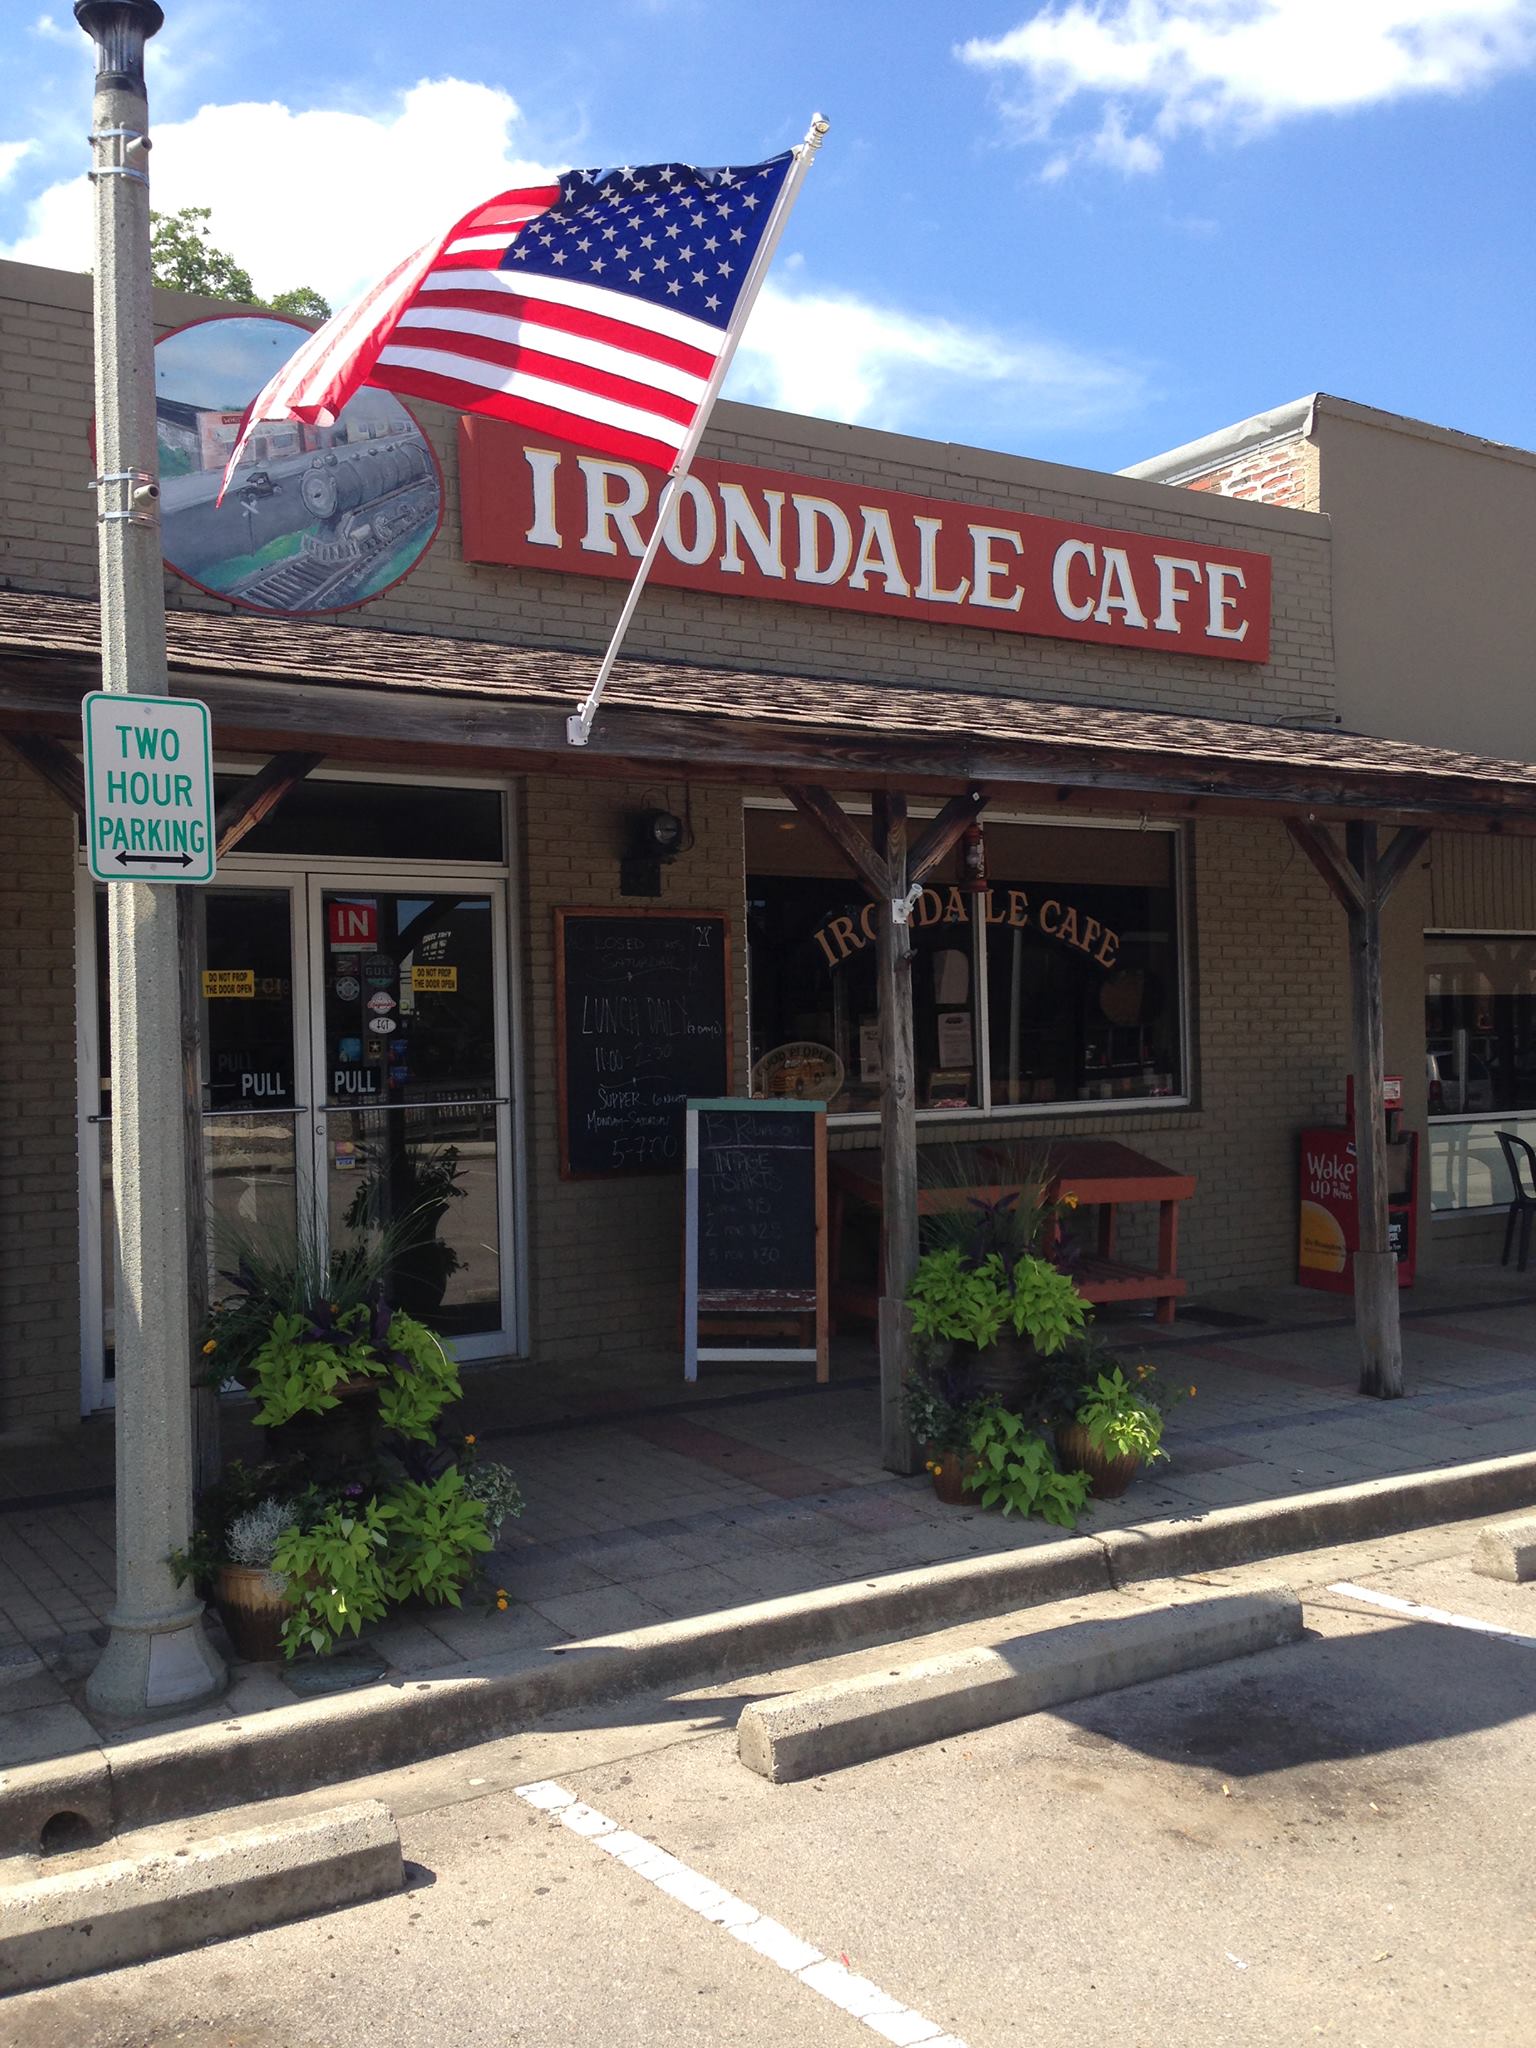 Irondale Cafe 5 restaurants serving up delicious eats for 90+ years in Birmingham